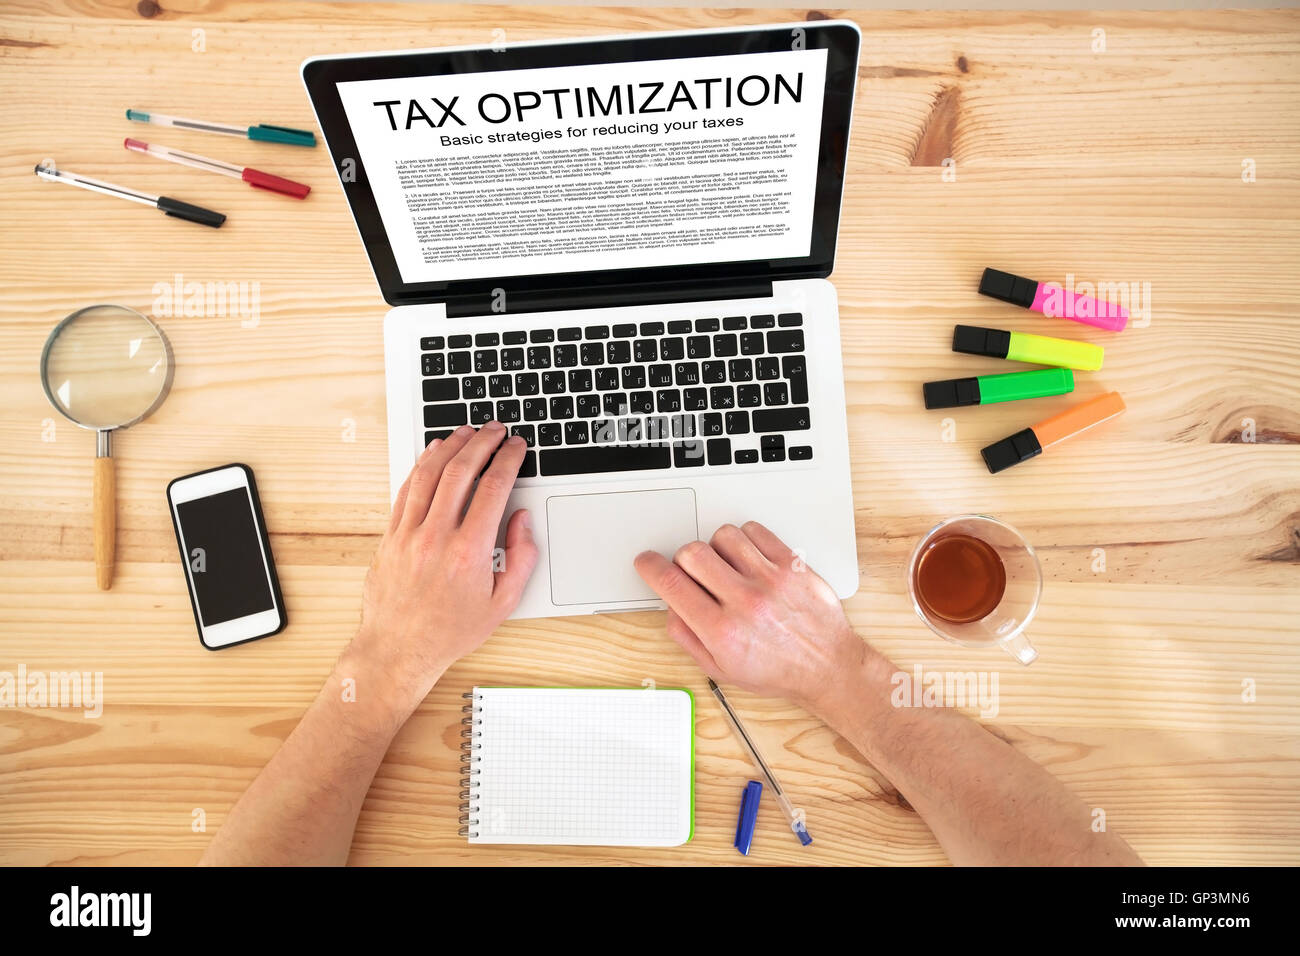 tax optimization concept, strategies for reducing taxes Stock Photo